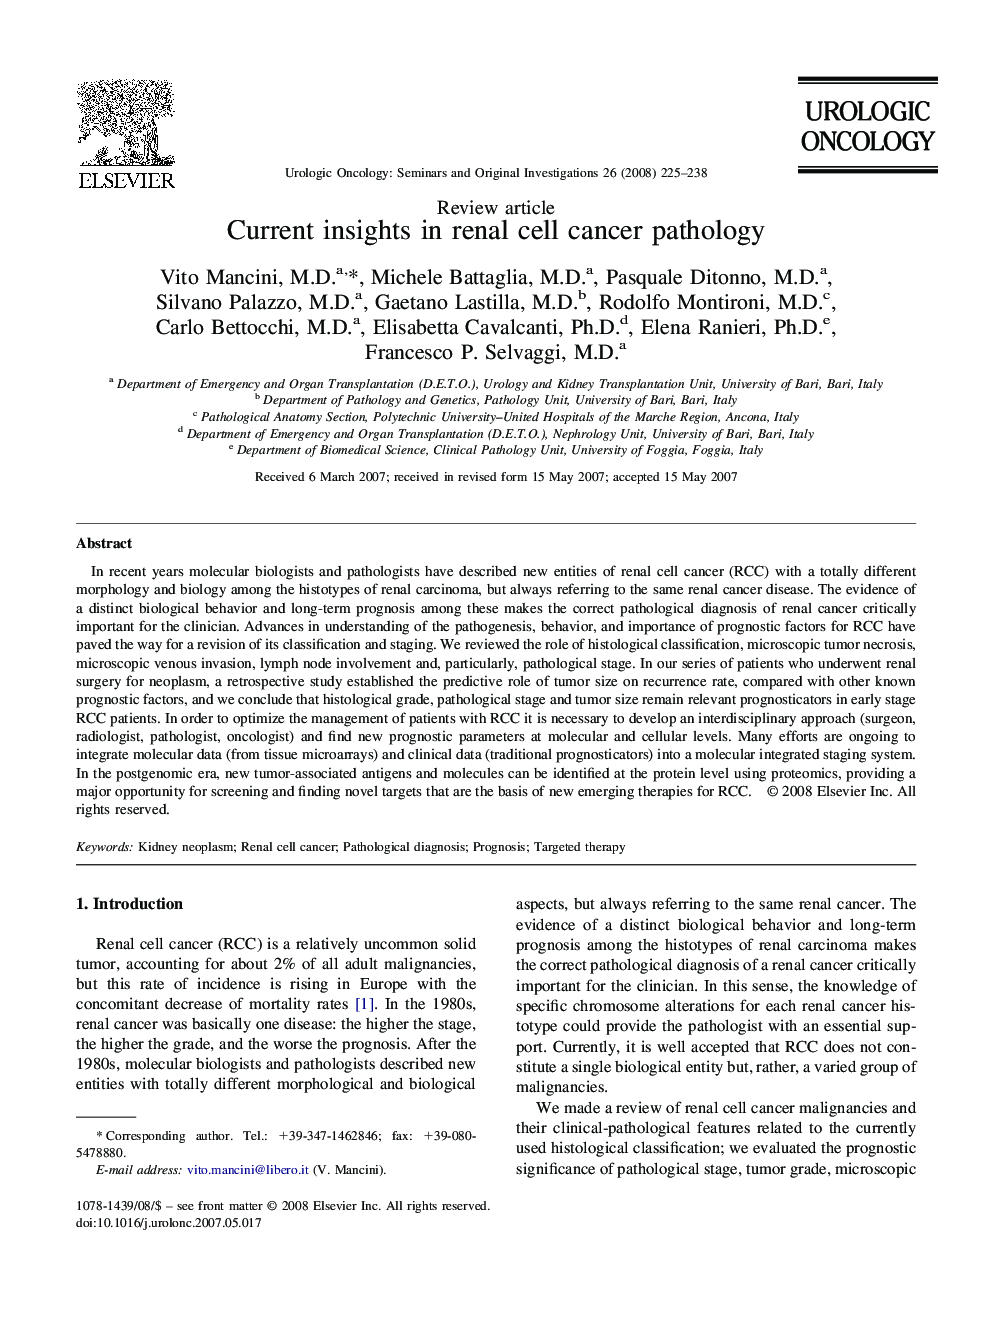 Current insights in renal cell cancer pathology